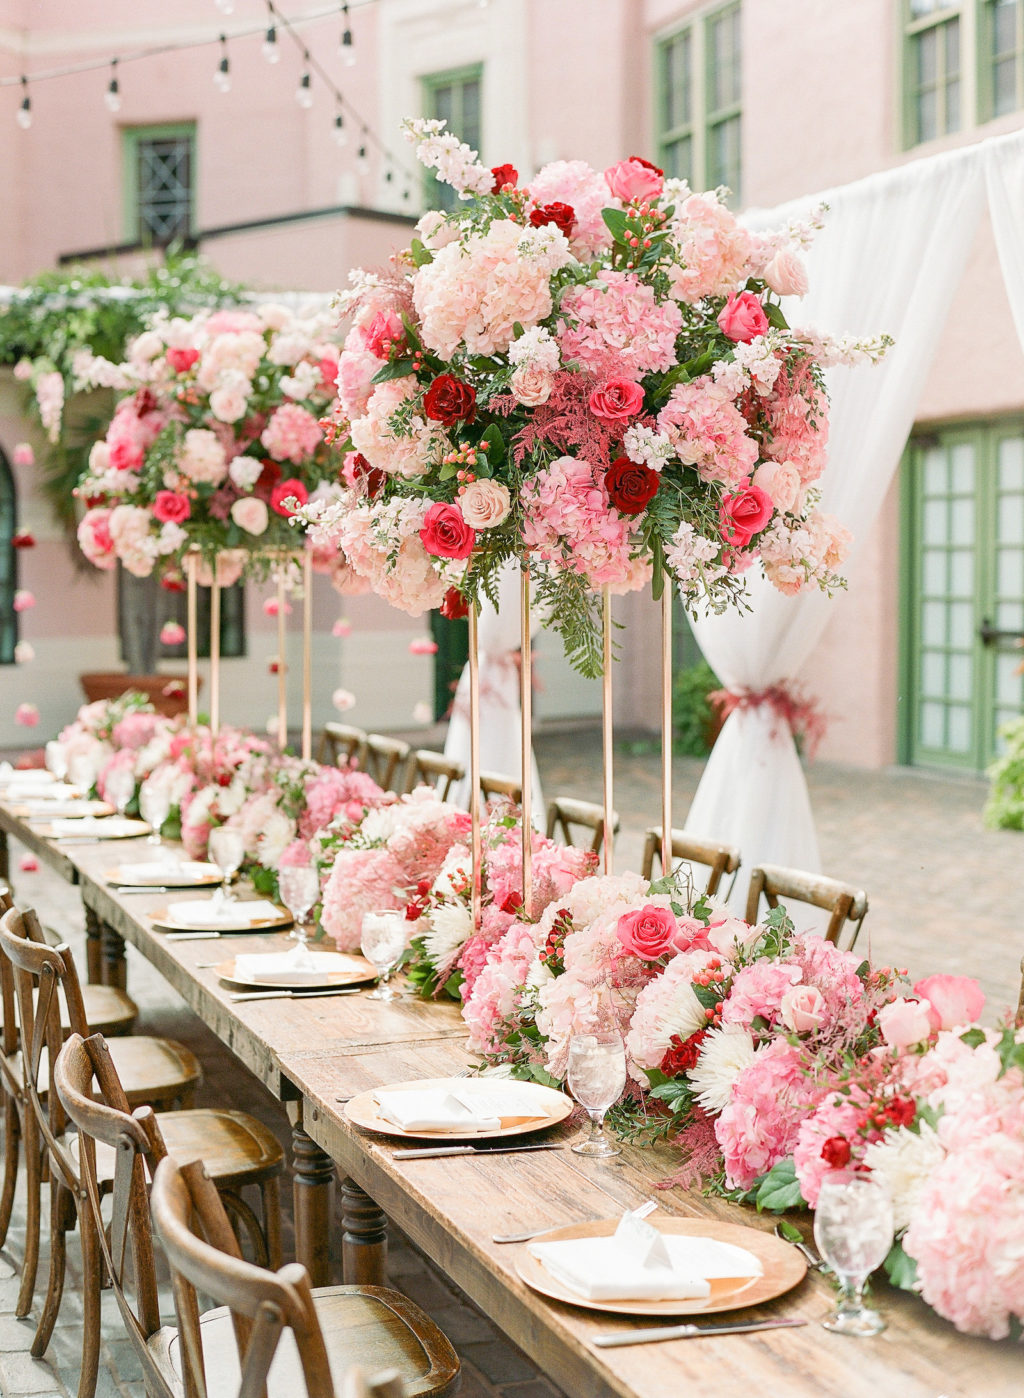 Elegant Garden Theme Wedding Reception Decor, White Drapery with Hanging Pink Flowers, Long Wooden Feasting Table with Wooden Cross Back Chairs, Tall Pink, Ivory and Red Floral Centerpiece, Lush Flowers Table Runner, Gold Chargers | St. Pete Wedding Venue The Vinoy Renaissance